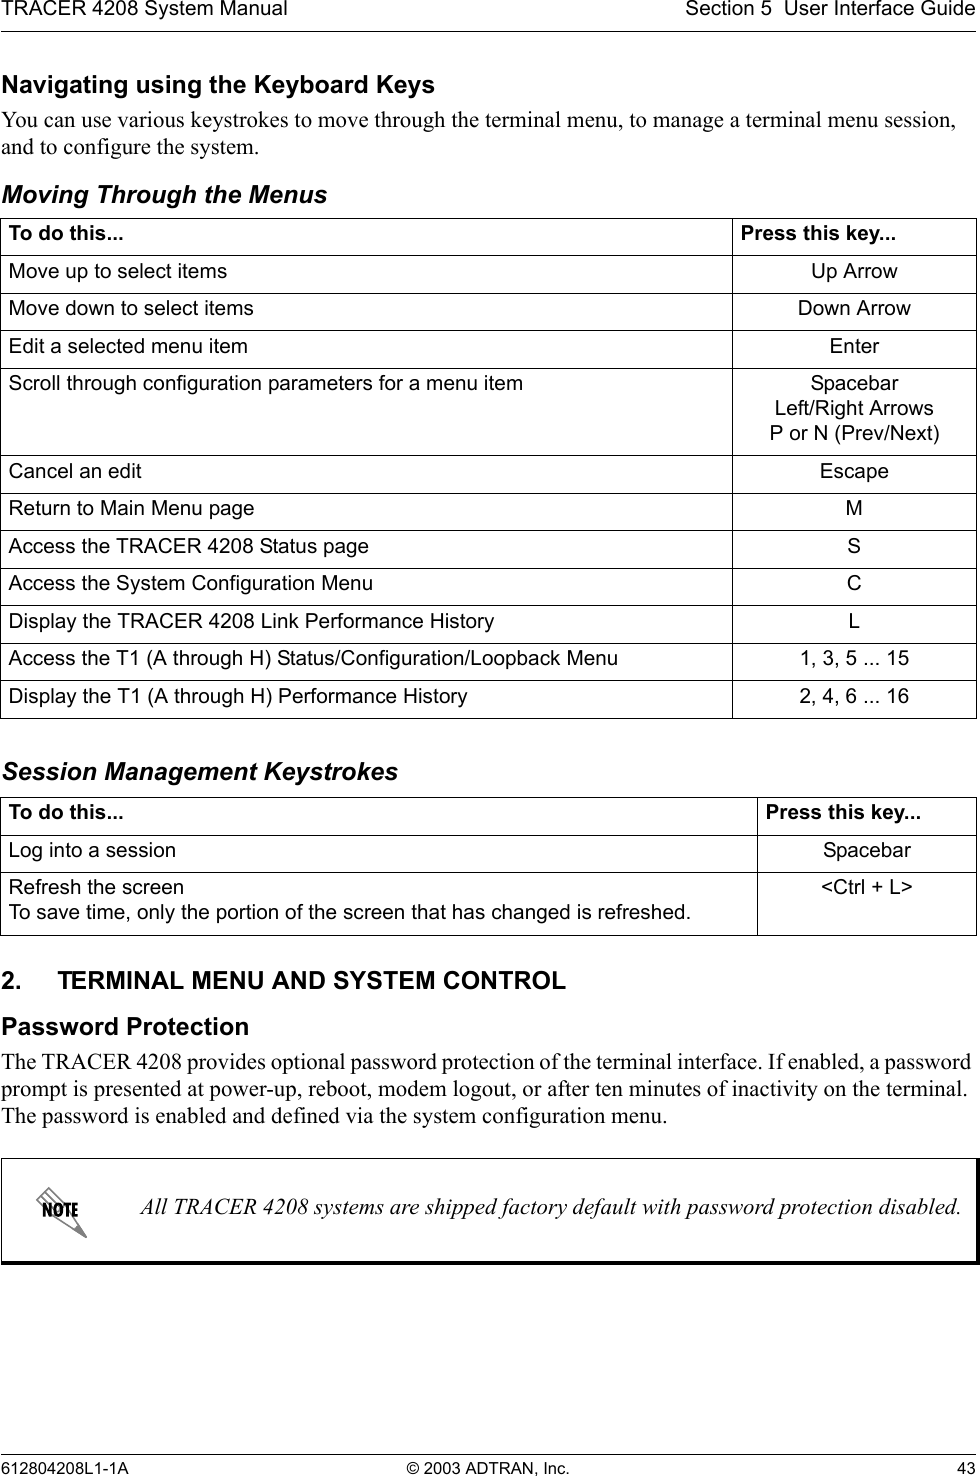 TRACER 4208 System Manual Section 5  User Interface Guide612804208L1-1A © 2003 ADTRAN, Inc. 43Navigating using the Keyboard KeysYou can use various keystrokes to move through the terminal menu, to manage a terminal menu session, and to configure the system.Moving Through the MenusSession Management Keystrokes2. TERMINAL MENU AND SYSTEM CONTROLPassword ProtectionThe TRACER 4208 provides optional password protection of the terminal interface. If enabled, a password prompt is presented at power-up, reboot, modem logout, or after ten minutes of inactivity on the terminal. The password is enabled and defined via the system configuration menu.To do this... Press this key...Move up to select items Up ArrowMove down to select items Down ArrowEdit a selected menu item EnterScroll through configuration parameters for a menu item SpacebarLeft/Right ArrowsP or N (Prev/Next)Cancel an edit EscapeReturn to Main Menu page MAccess the TRACER 4208 Status page SAccess the System Configuration Menu CDisplay the TRACER 4208 Link Performance History LAccess the T1 (A through H) Status/Configuration/Loopback Menu 1, 3, 5 ... 15Display the T1 (A through H) Performance History 2, 4, 6 ... 16To do this... Press this key...Log into a session SpacebarRefresh the screenTo save time, only the portion of the screen that has changed is refreshed. &lt;Ctrl + L&gt;All TRACER 4208 systems are shipped factory default with password protection disabled.